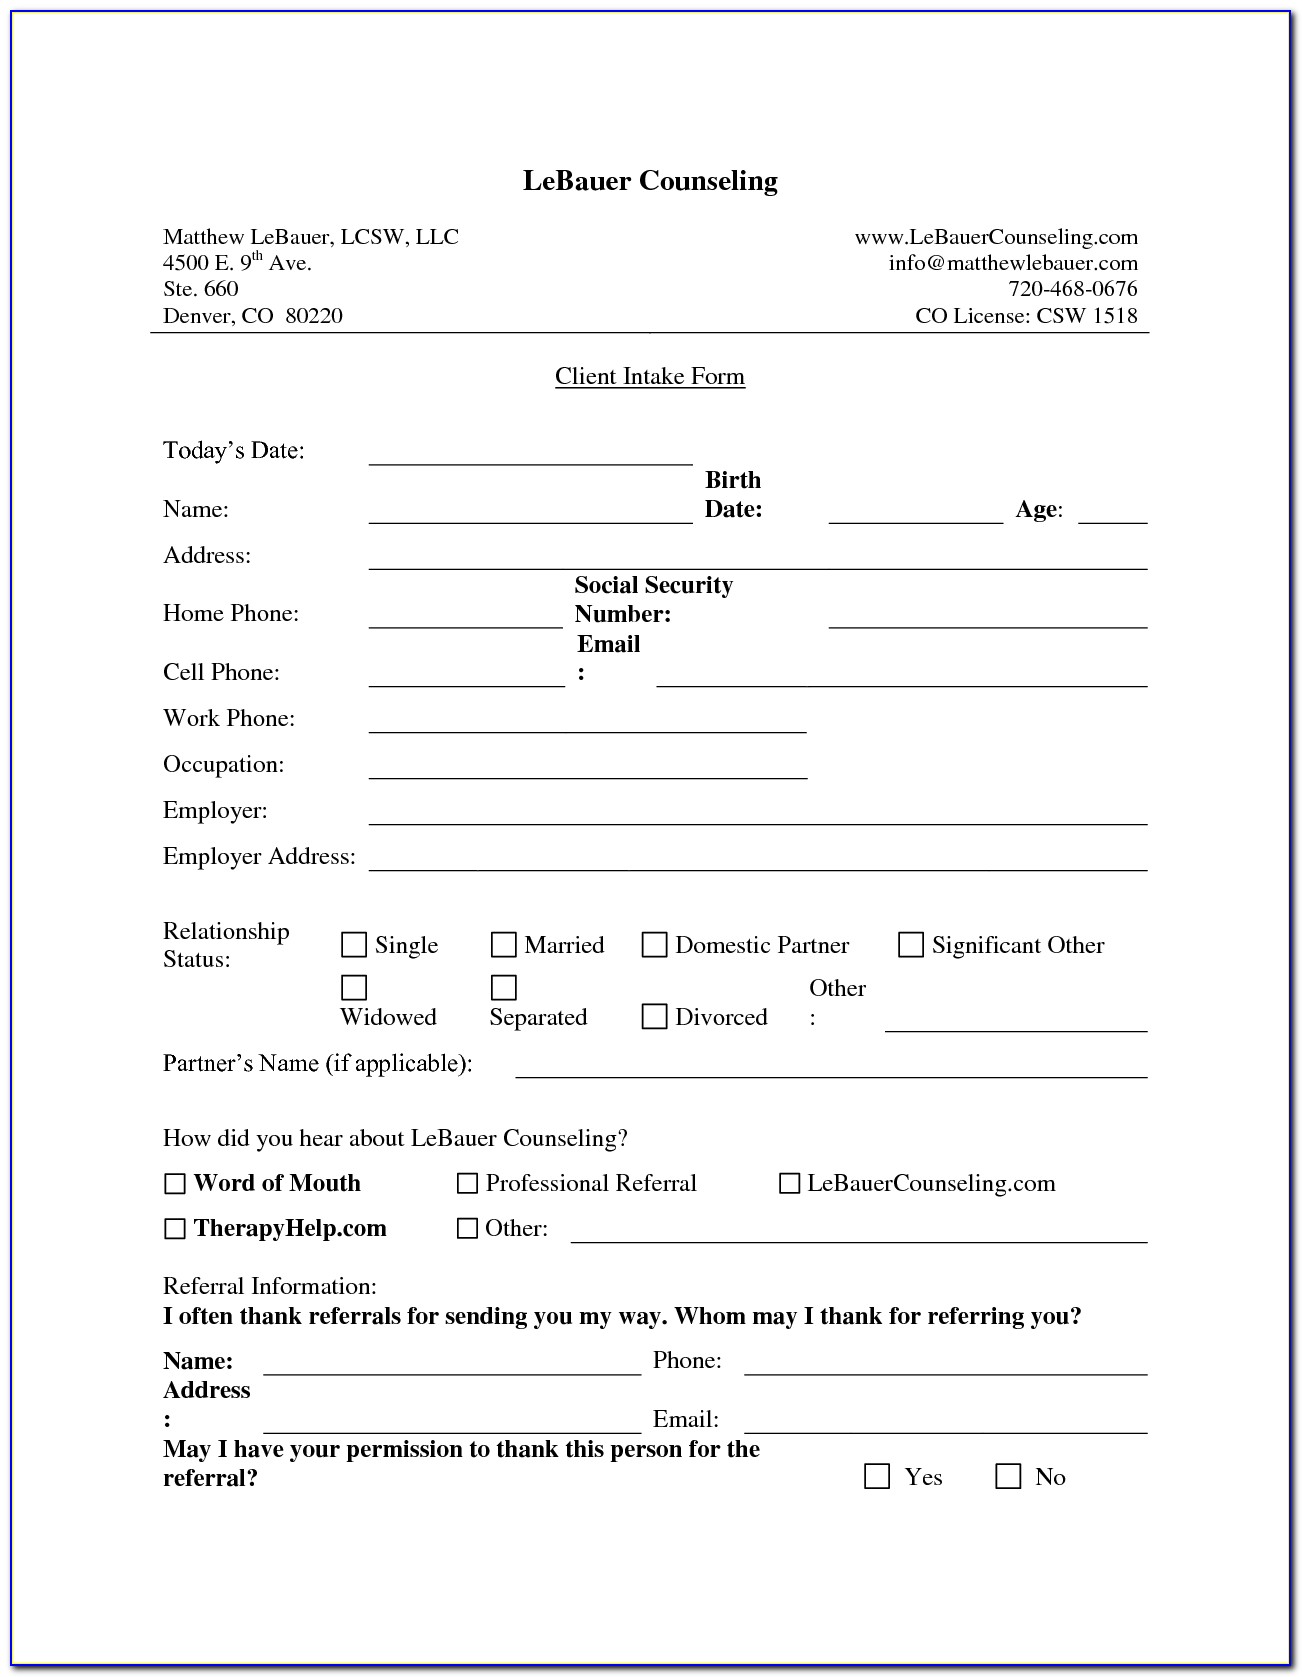 Real Estate Agent Client Intake Form